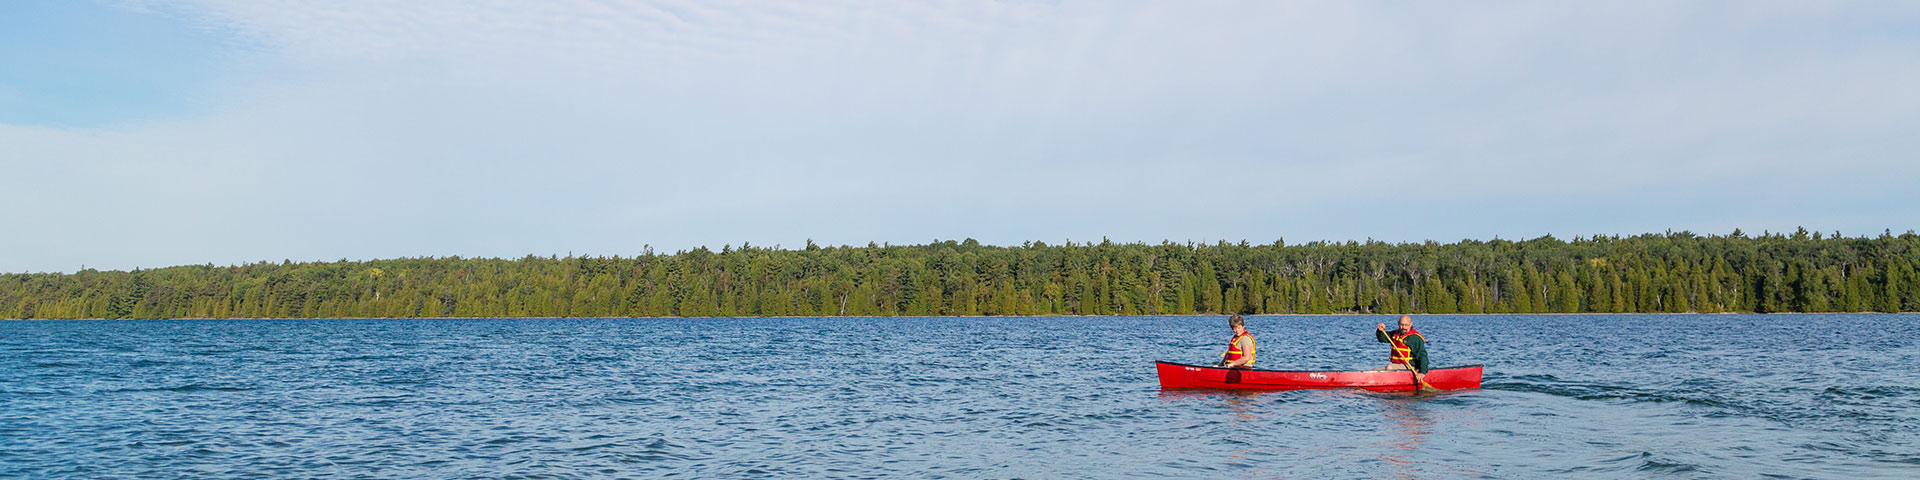 A red canoe on a lake.